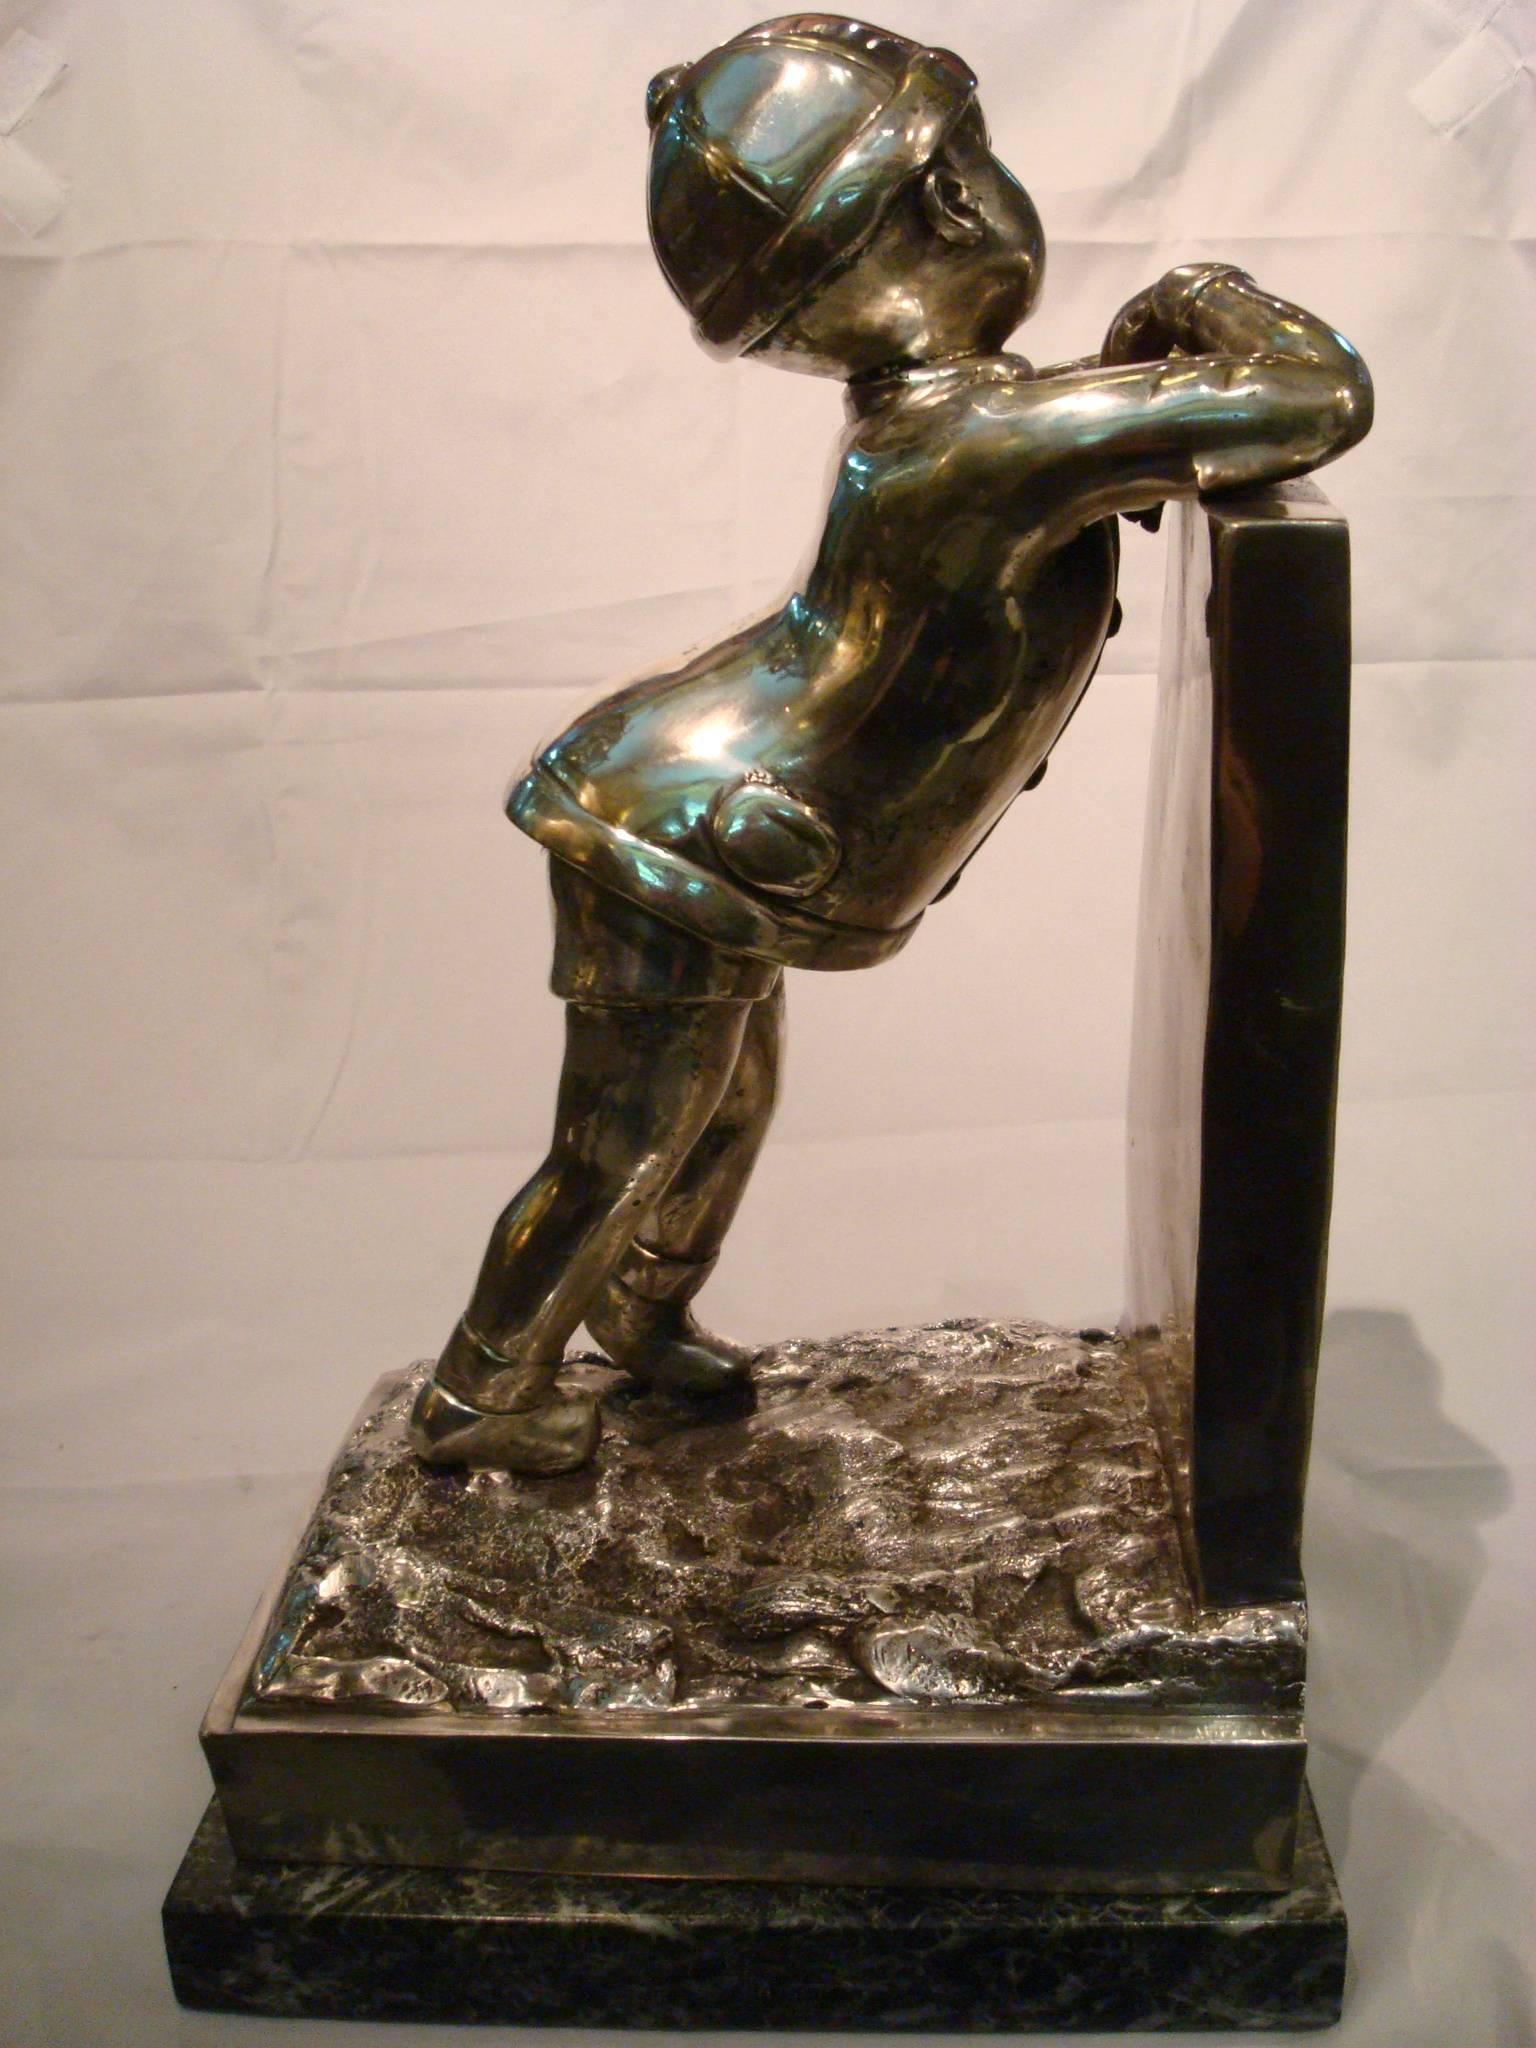 Large Art Deco sculpture of boy looking over the fence. Signed A. Kelety. Silvered bronze-mounted over green marble. Russian Boy with Classic snow hat, same character used by the artist in other figures.